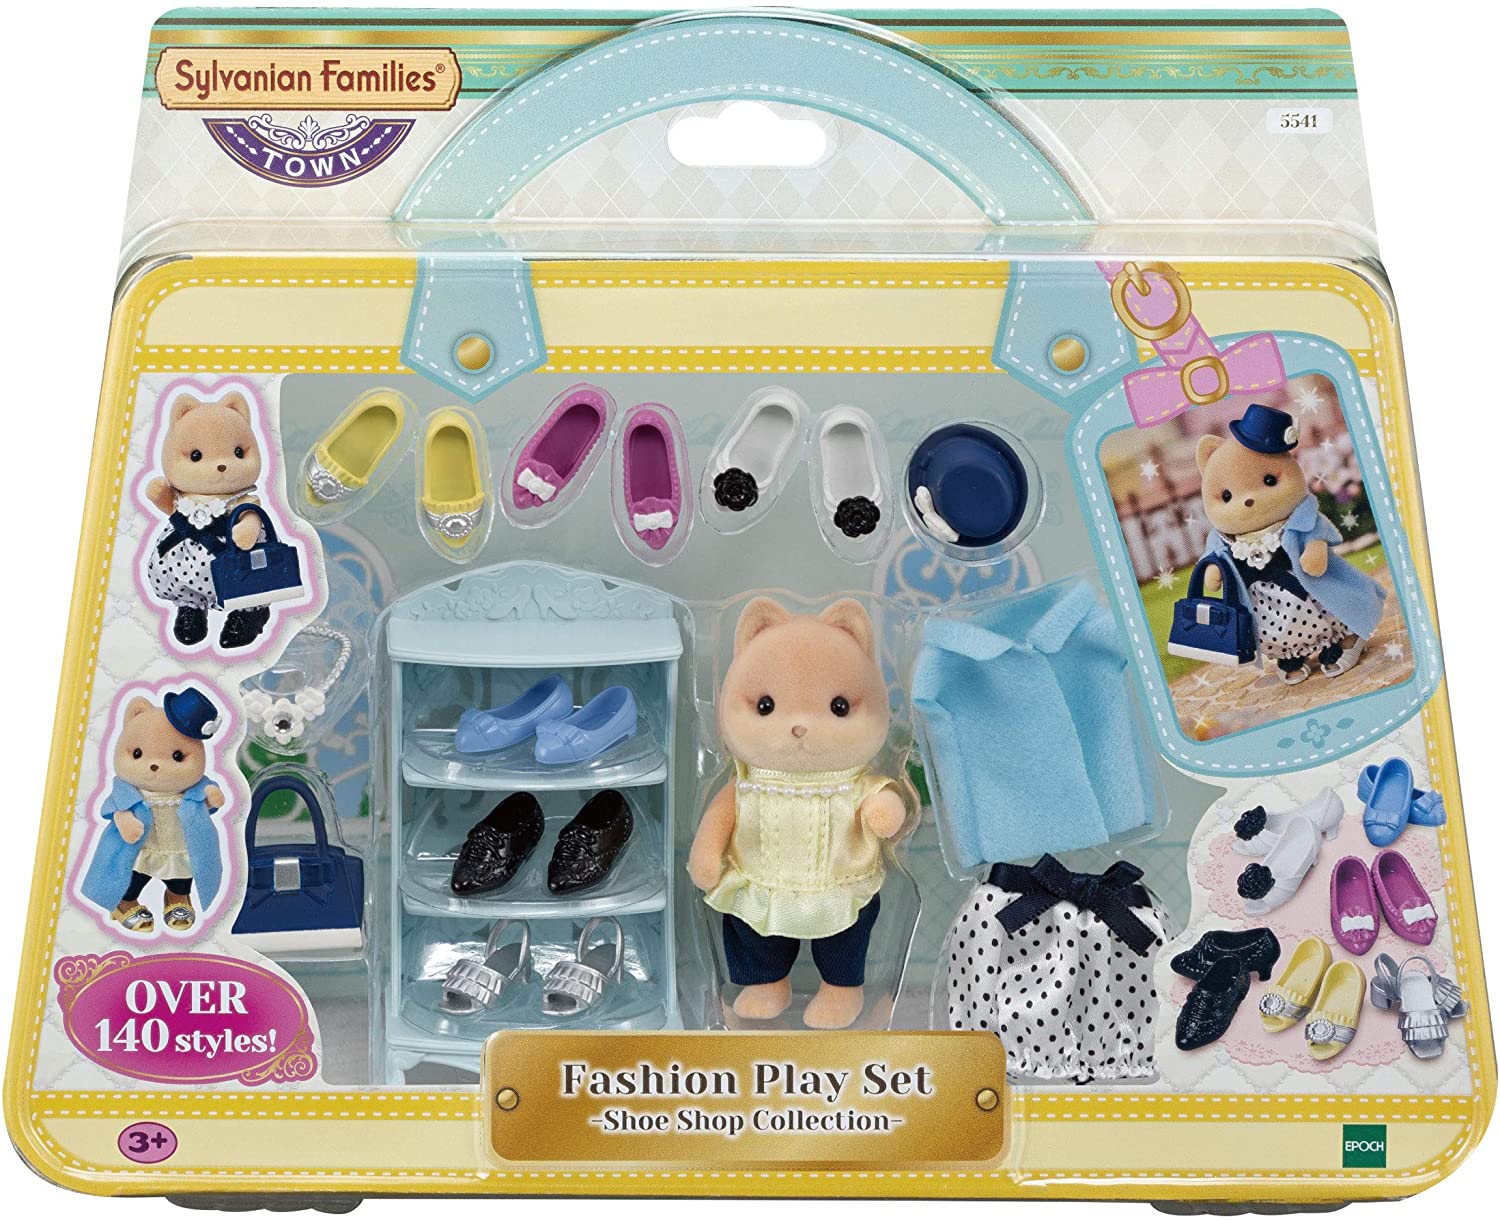 New Calico family Spooky Critters Midnight sets Shop, Families Panda Shoe House, 2021: more! toy Surprise family, Sylvanian Cat and